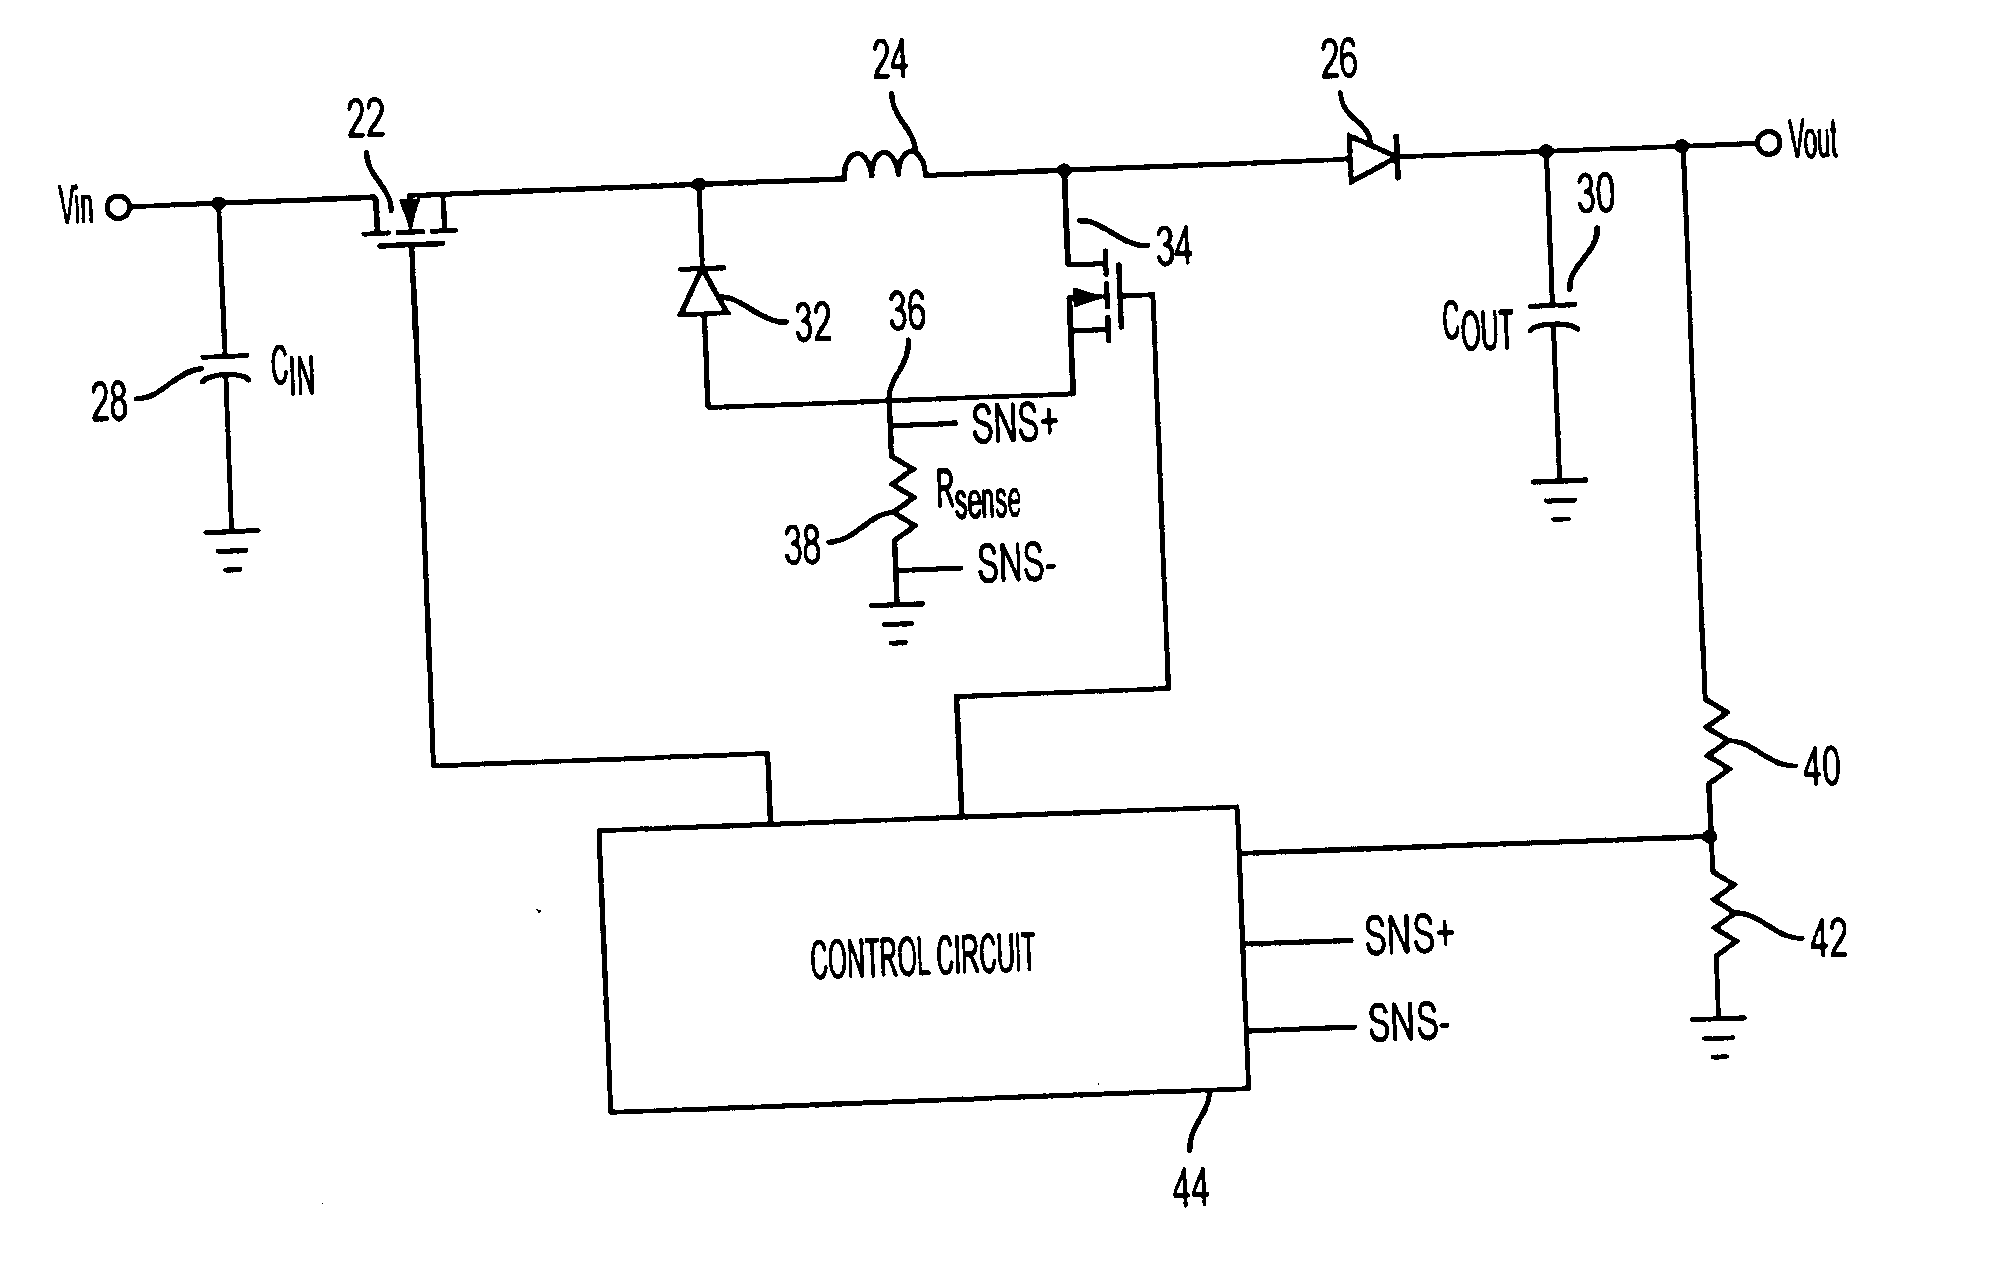 Current-mode control for switched step up-step down regulators